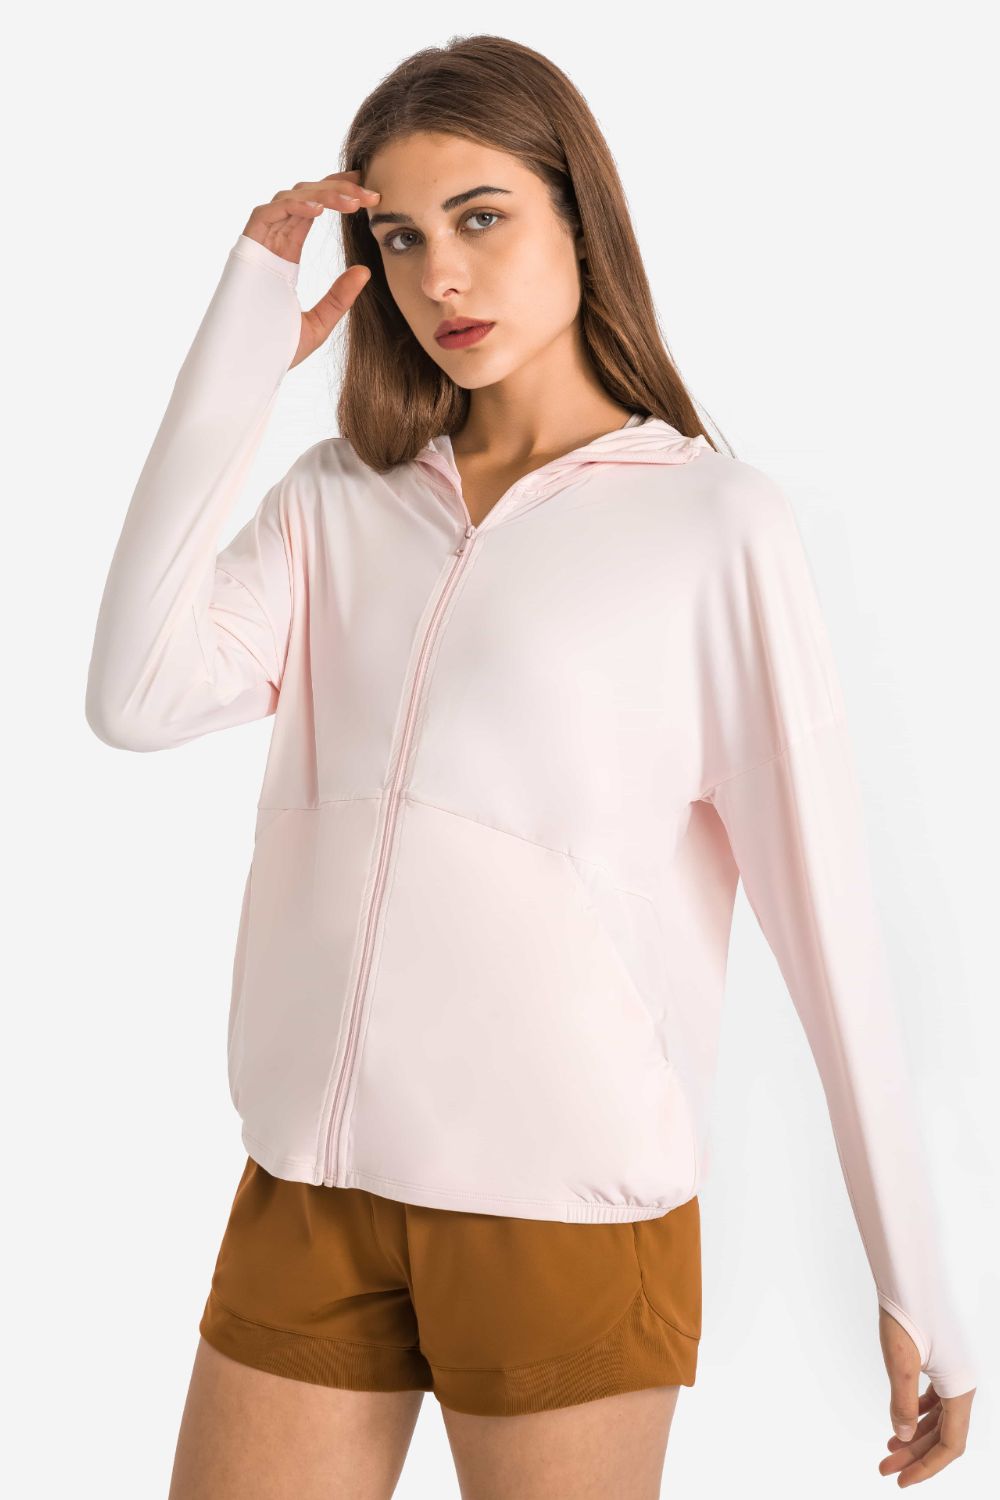 Misty Rose Sweat Now Shine Later Zip Up Dropped Shoulder Hooded Sports Jacket activewear